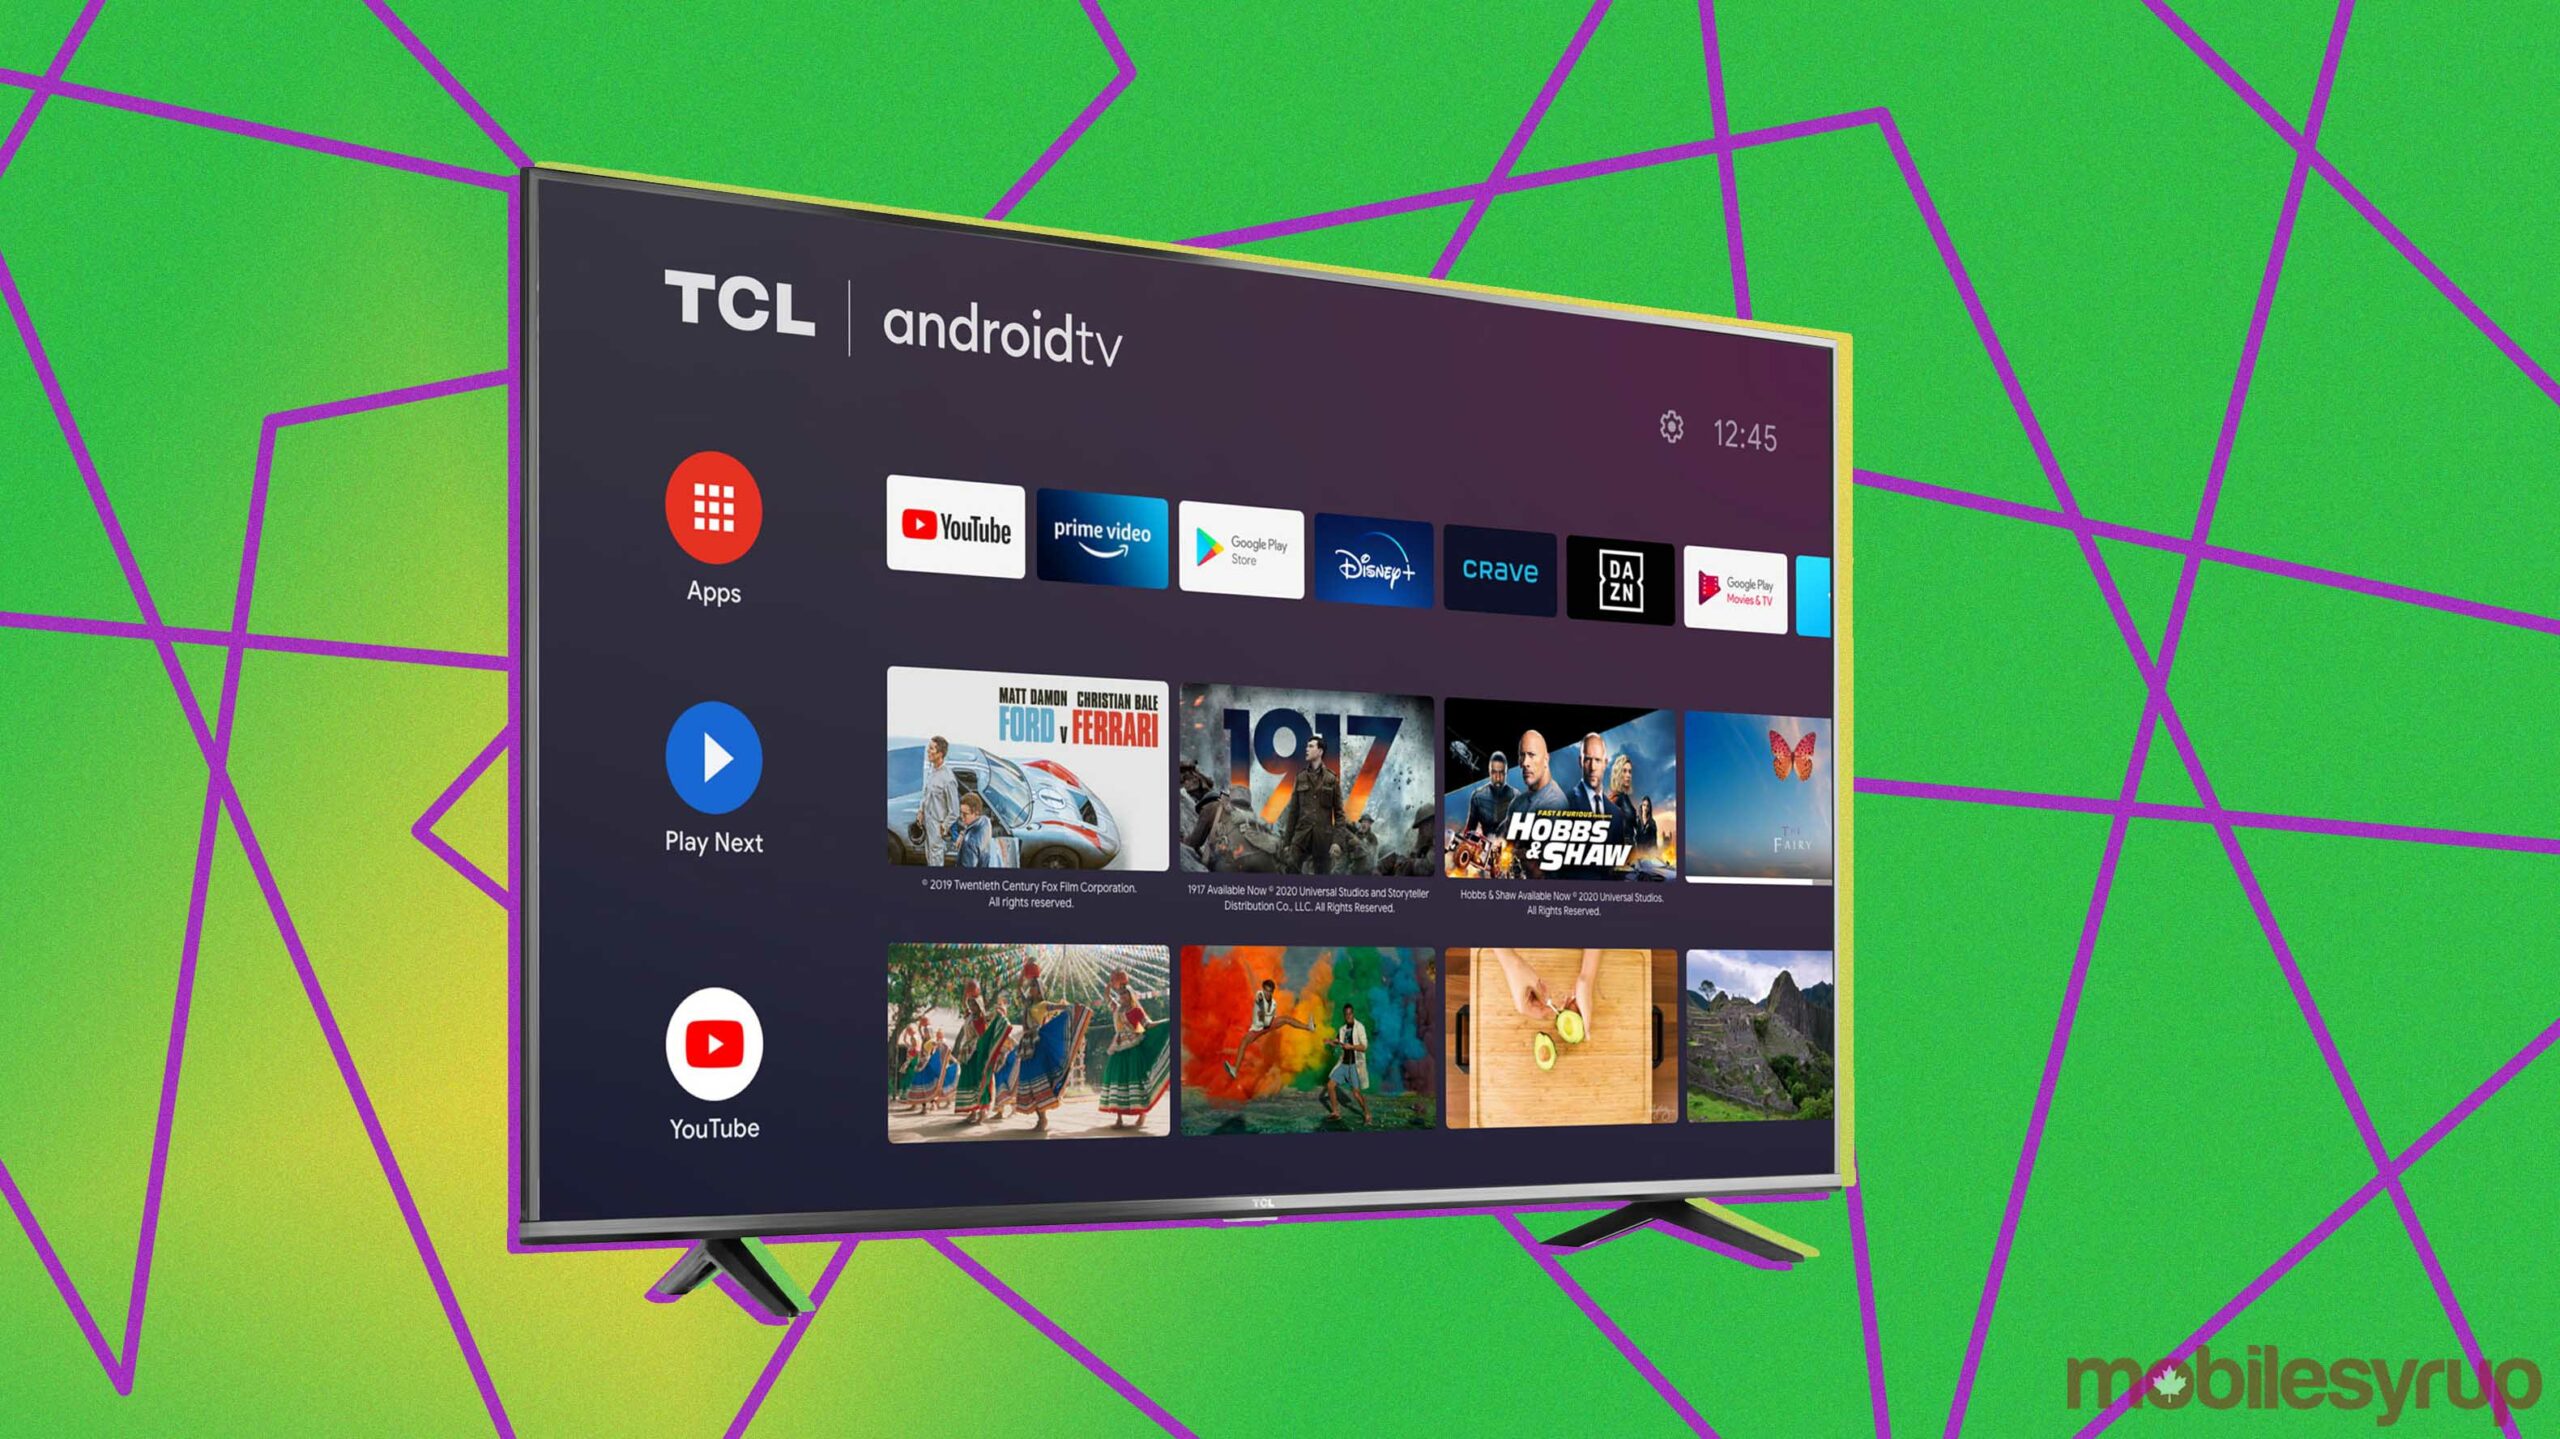 TCL Android TV. ТСЛ телевизор андроид. TCL 40se. Android TV TCL за 11 000.